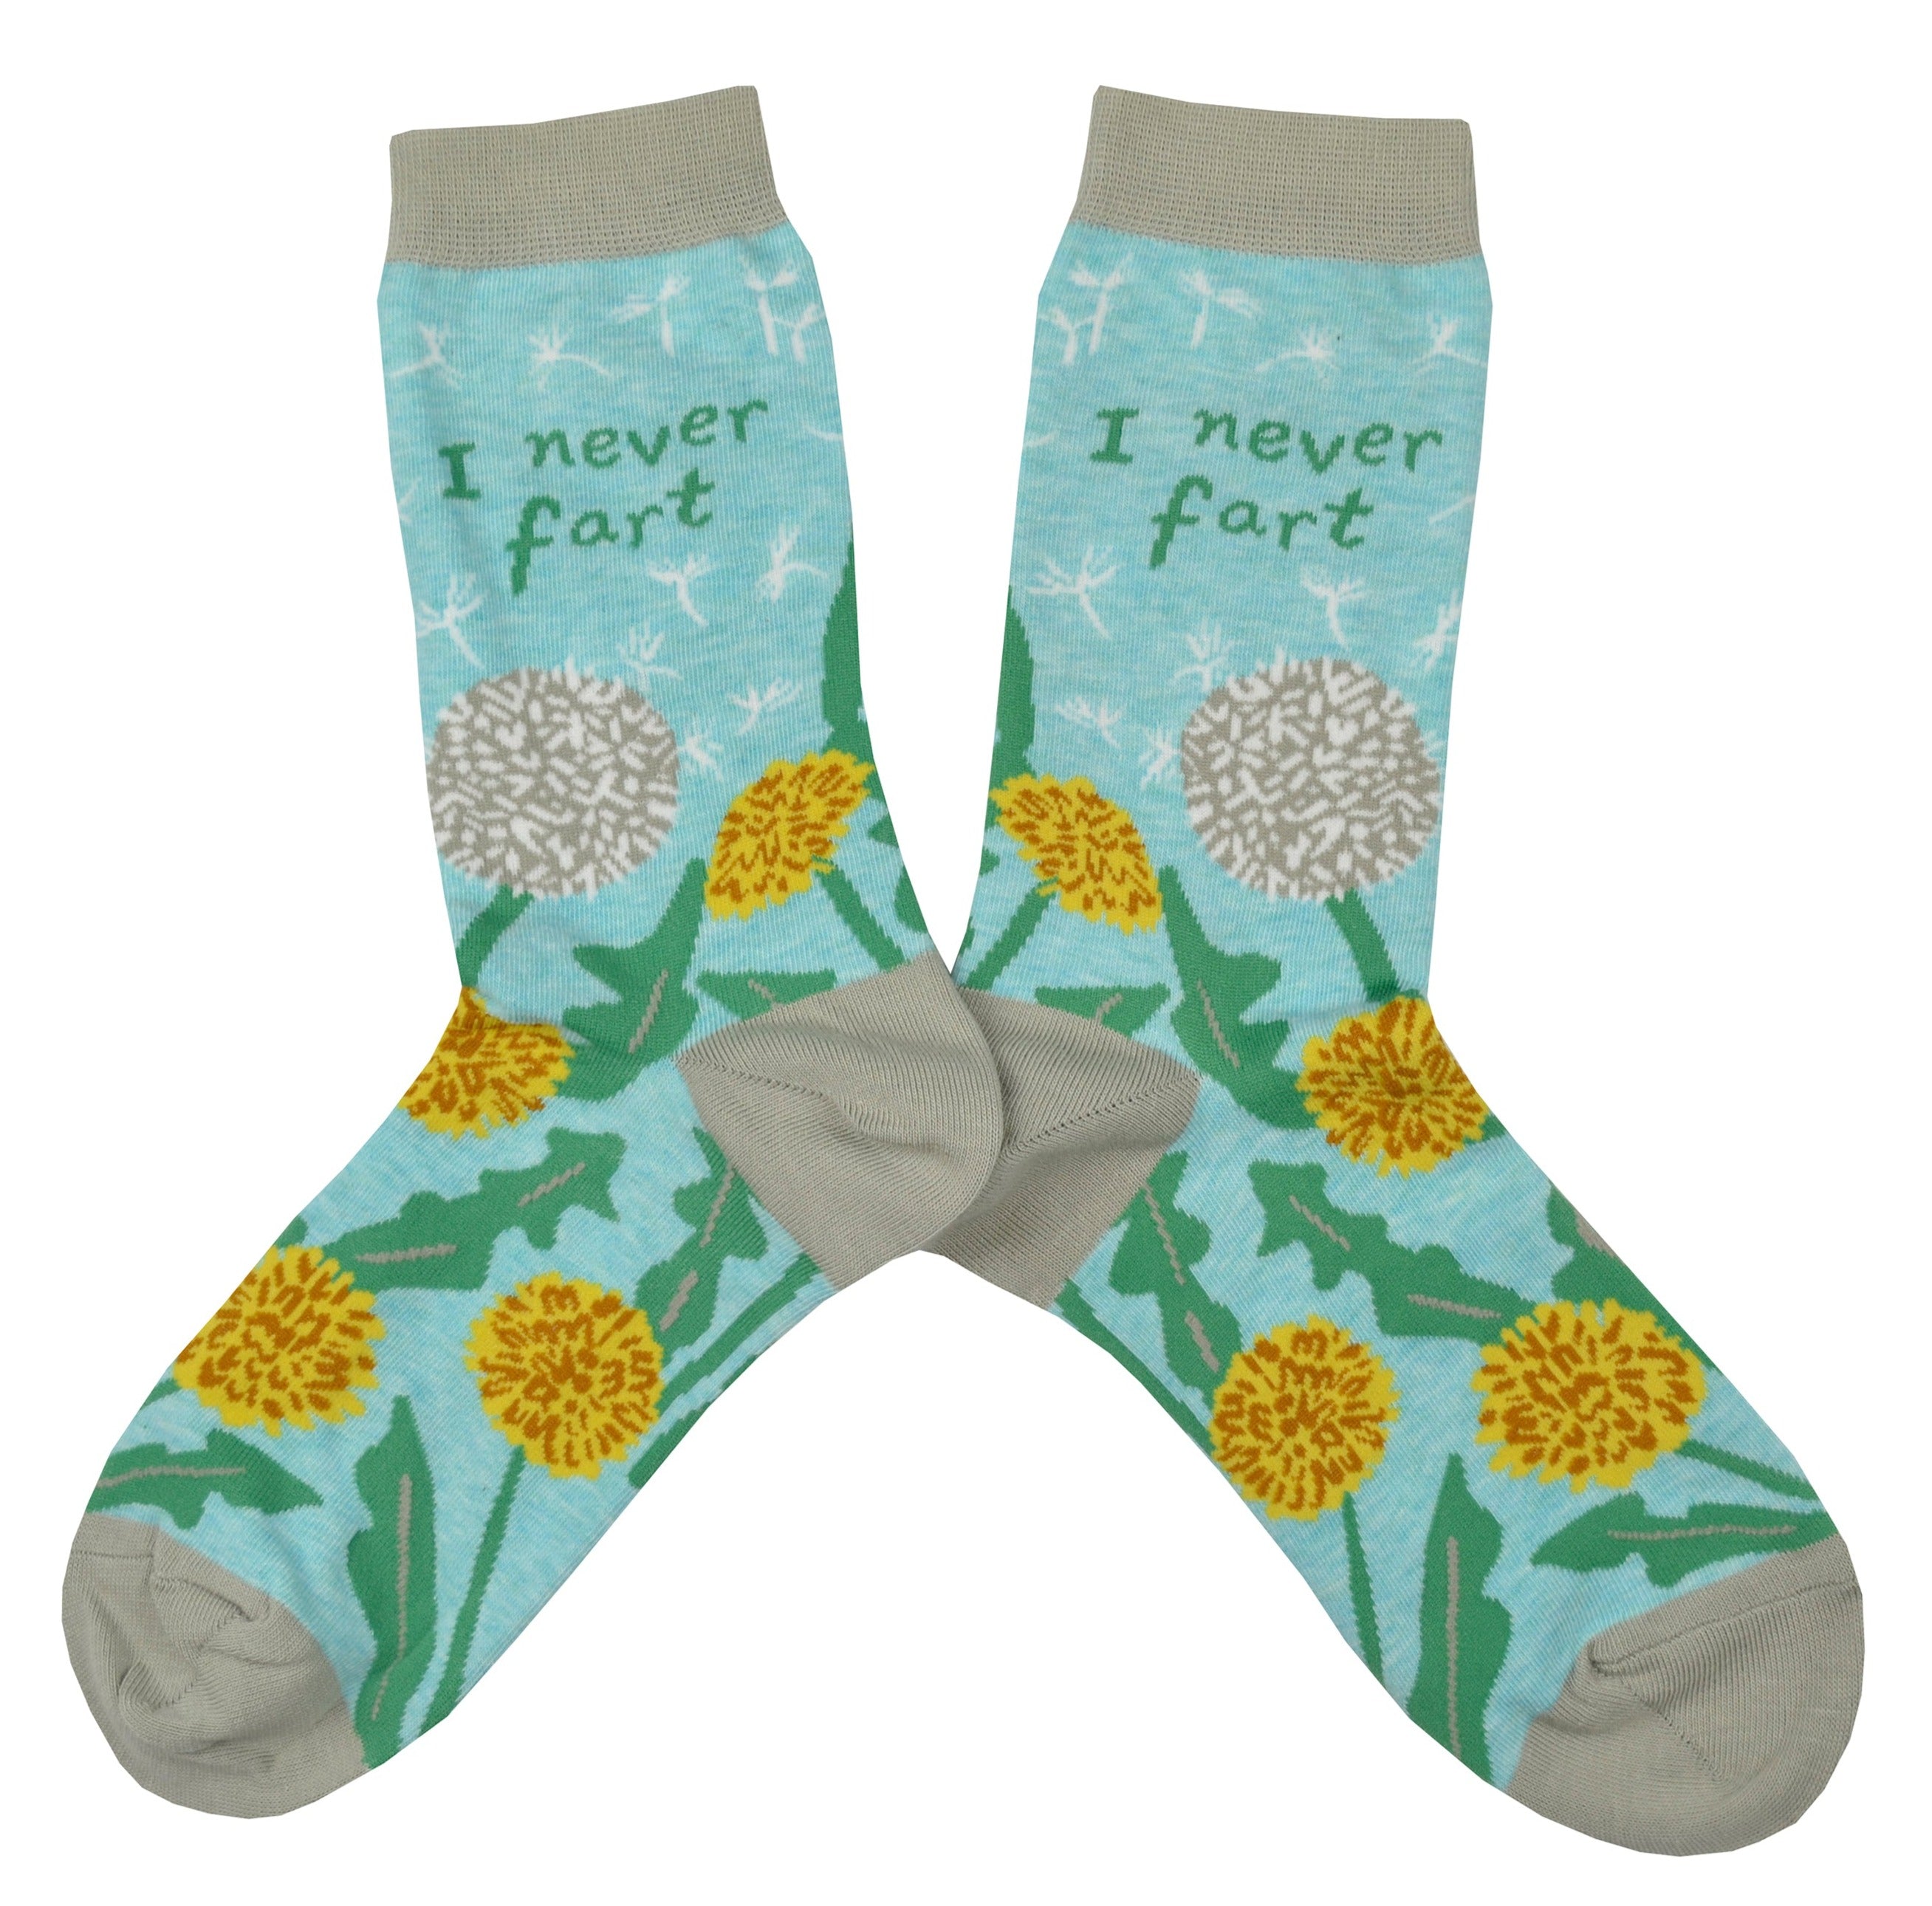 Shown in a flatlay, a pair of light blue Blue Q socks with a grey heel, toe, and cuff. They feature a dandelion and puffball design on the foot with the words, 